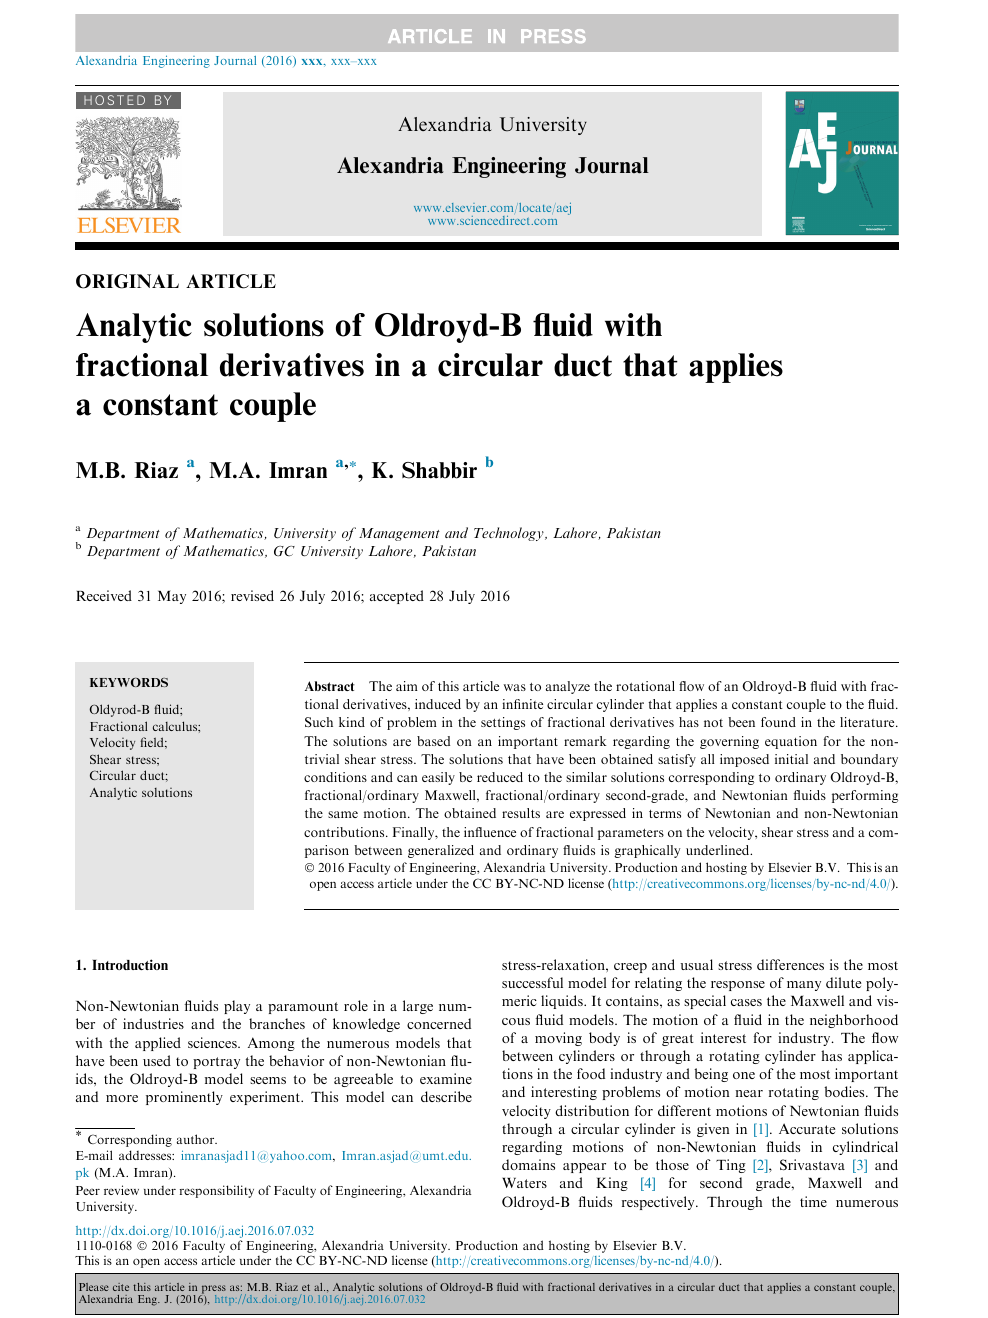 Analytic Solutions Of Oldroyd B Fluid With Fractional Derivatives In A Circular Duct That Applies A Constant Couple Topic Of Research Paper In Mathematics Download Scholarly Article Pdf And Read For Free